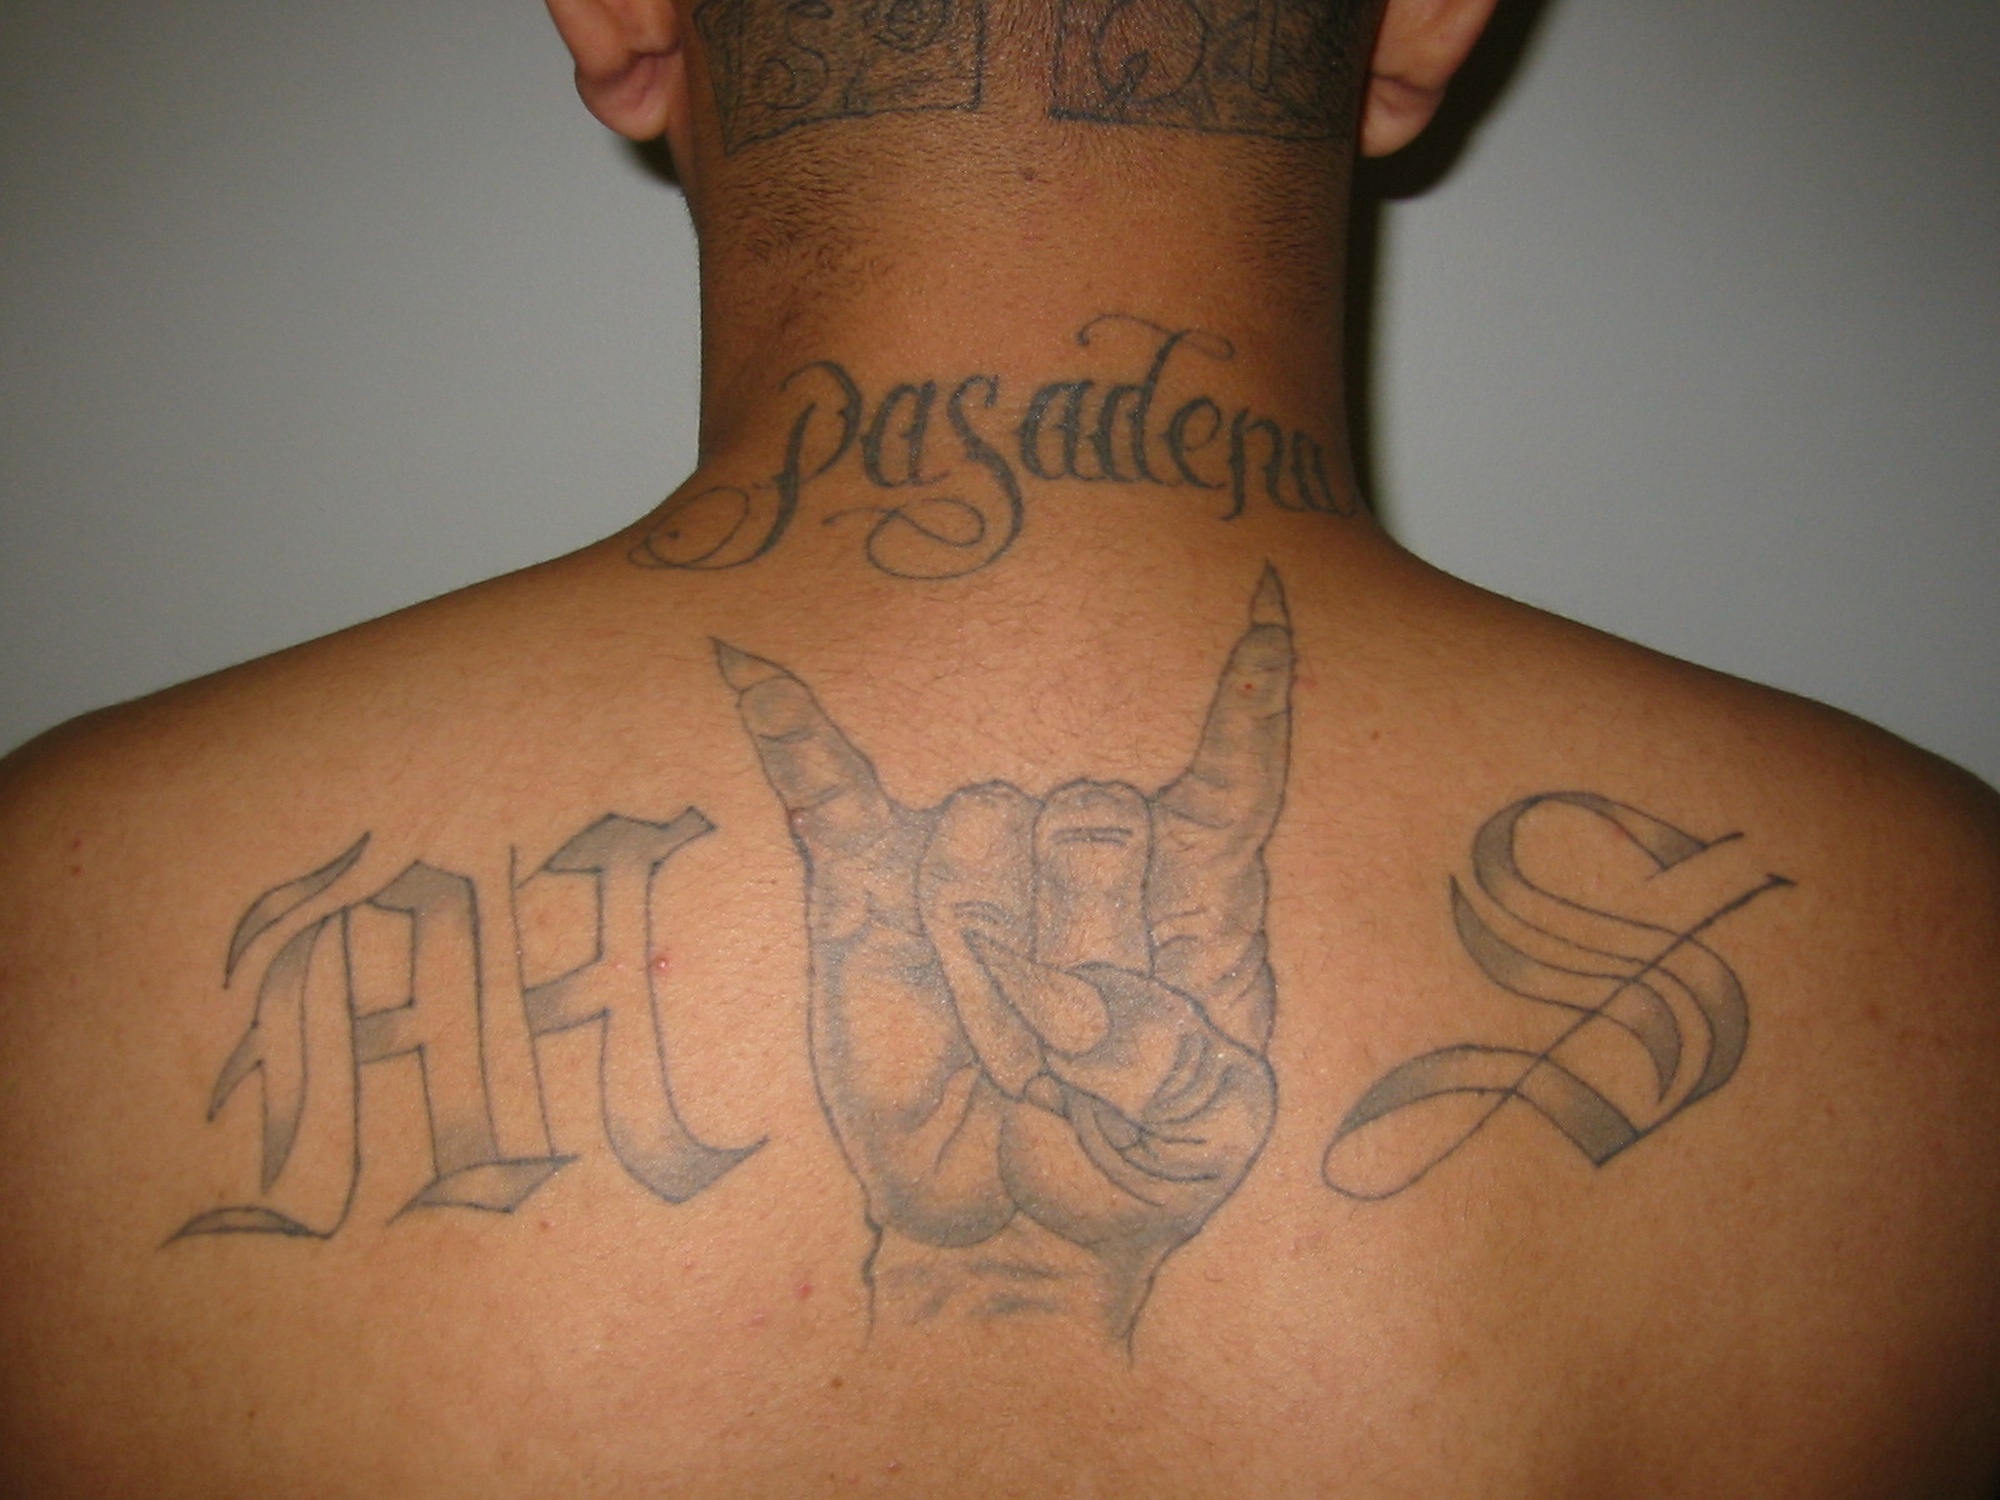 Images capture the tattooed members of El Salvadors brutal MS13 gang   The Sun